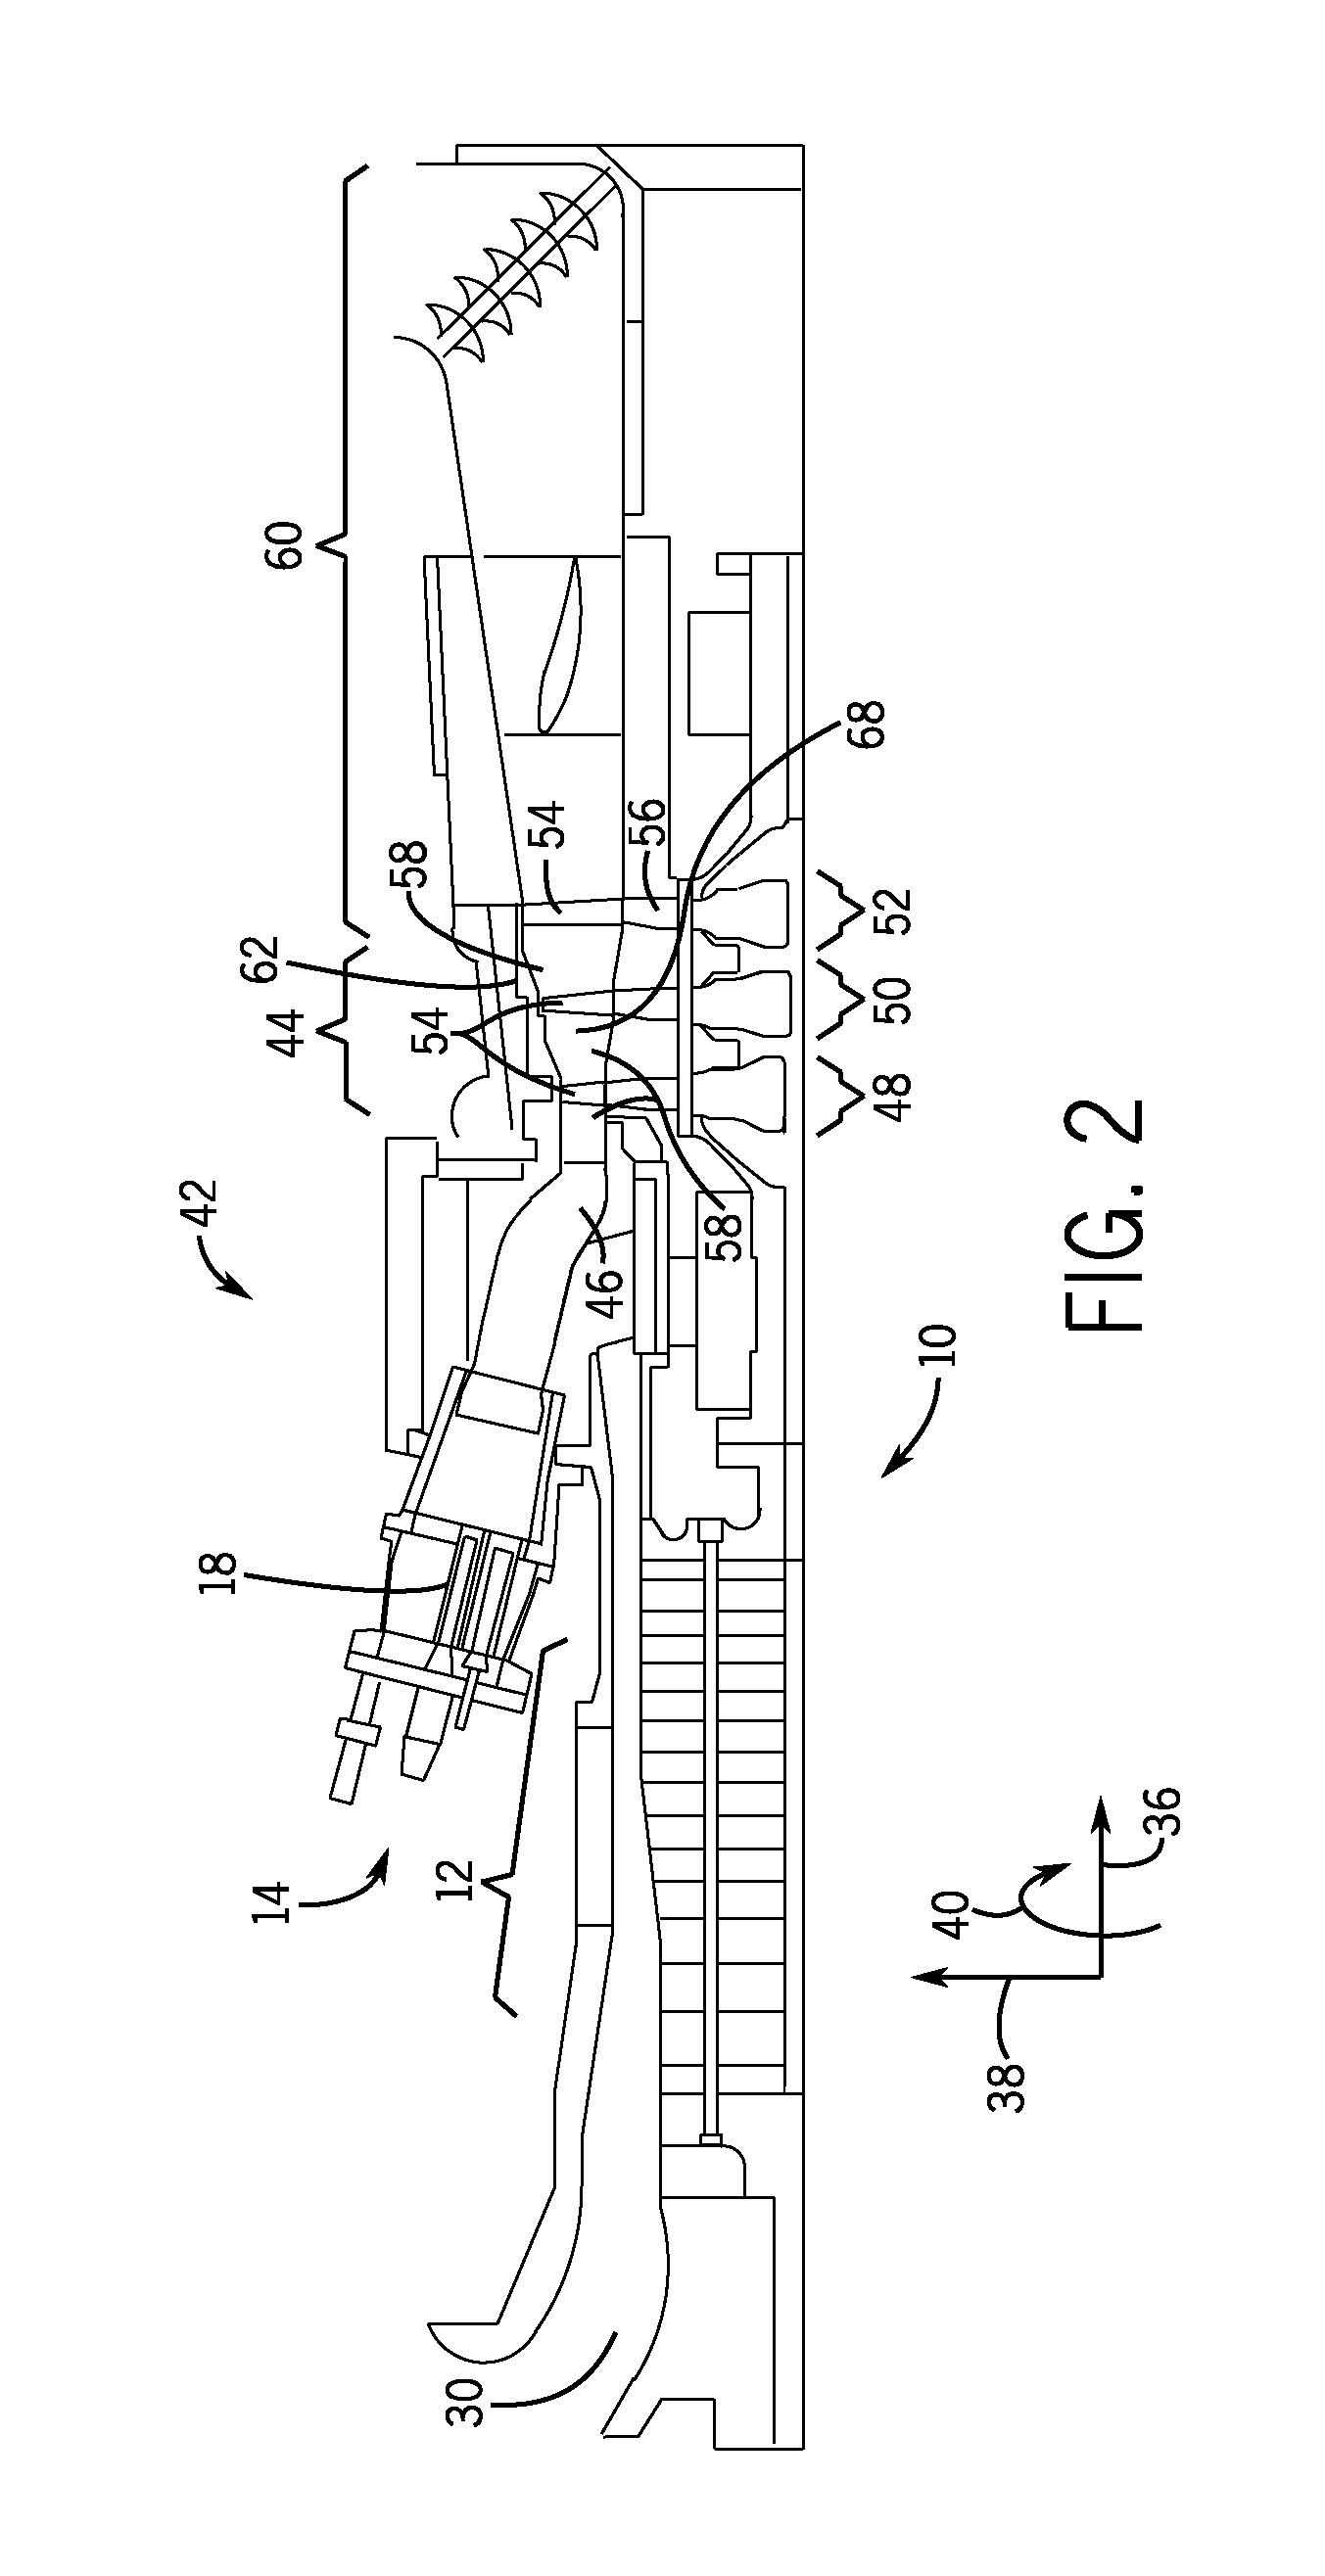 Method and apparatus to improve heat transfer in turbine sections of gas turbines